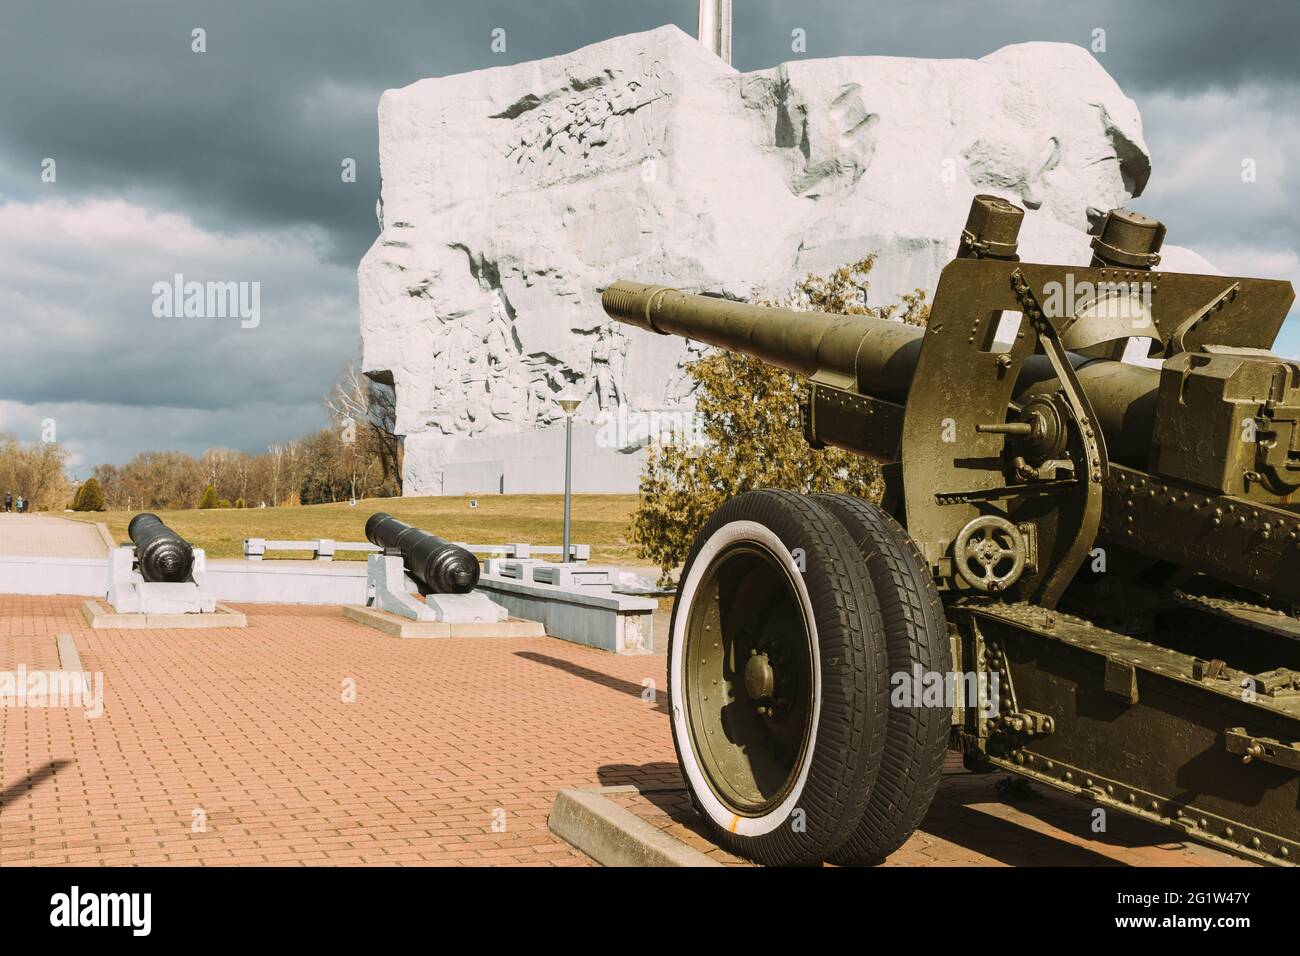 Brest, Belarus. Monument Of Courage In The Brest Fortress. Cannons At Bas-relief Of Monument Of Courage In Brest Fortress Stock Photo